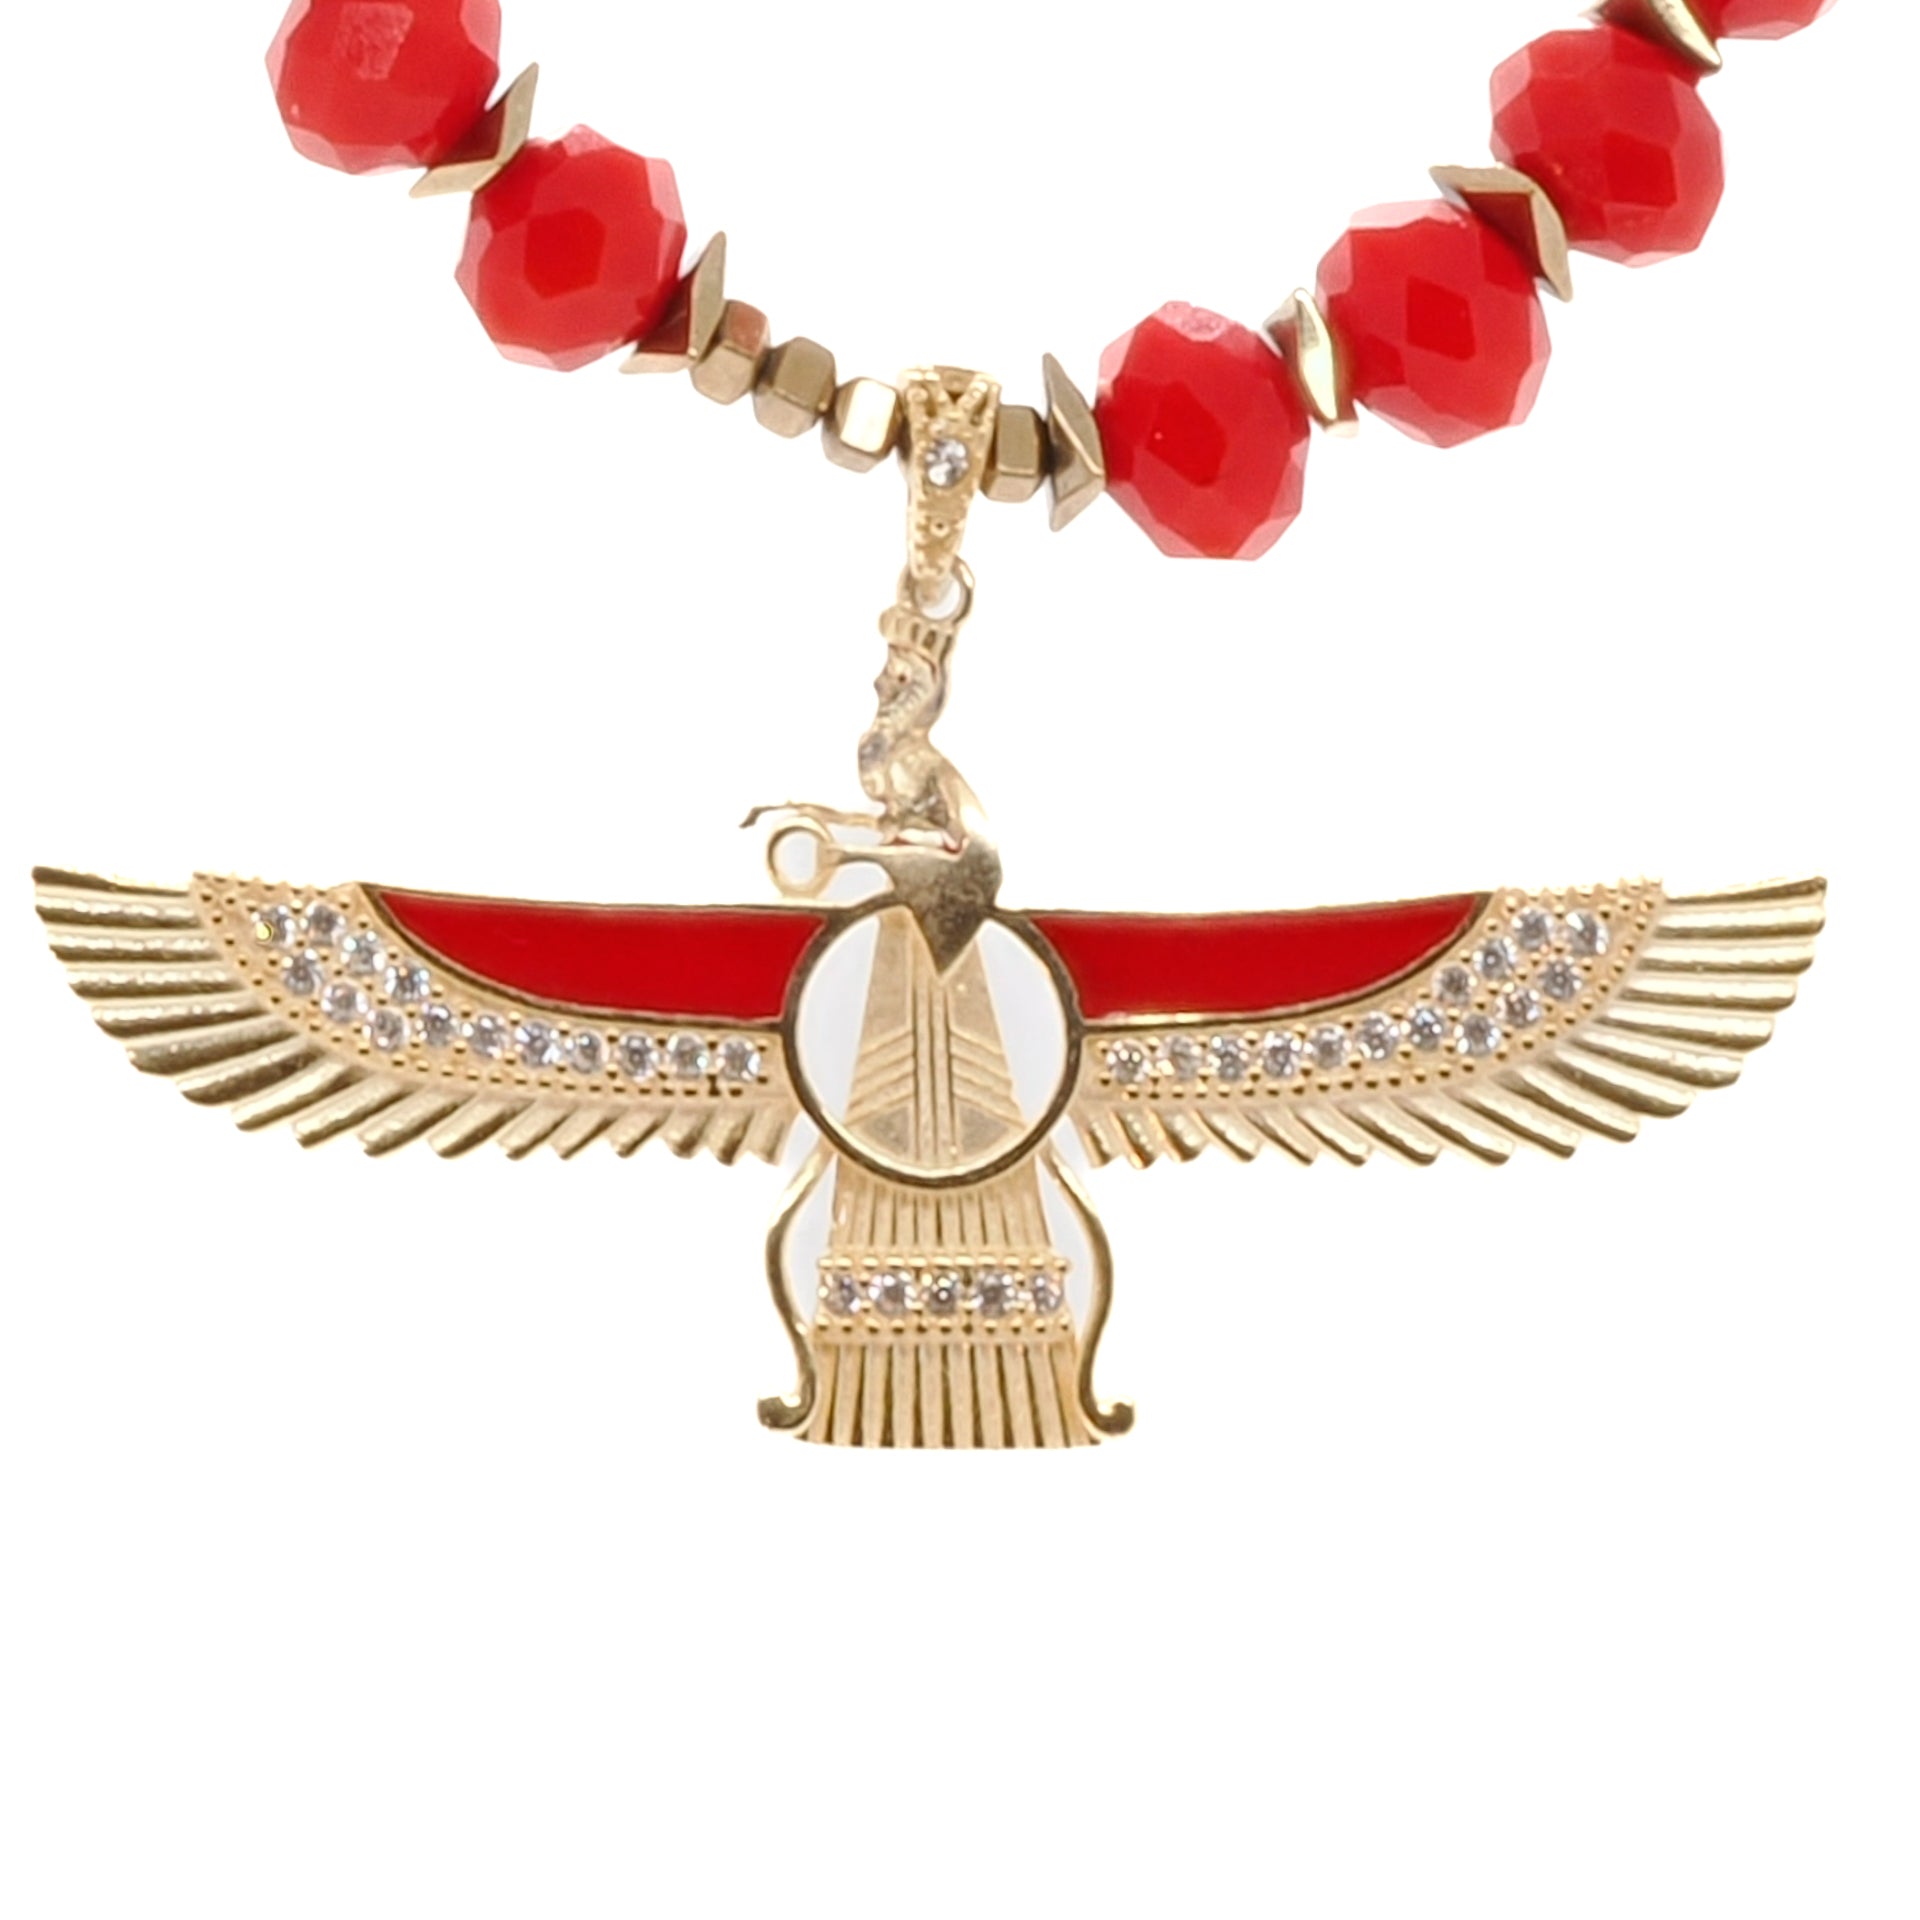 Red Crystal Faravahar Necklace - Handmade Jewelry with Gold Hematite and Red Crystal Beads.